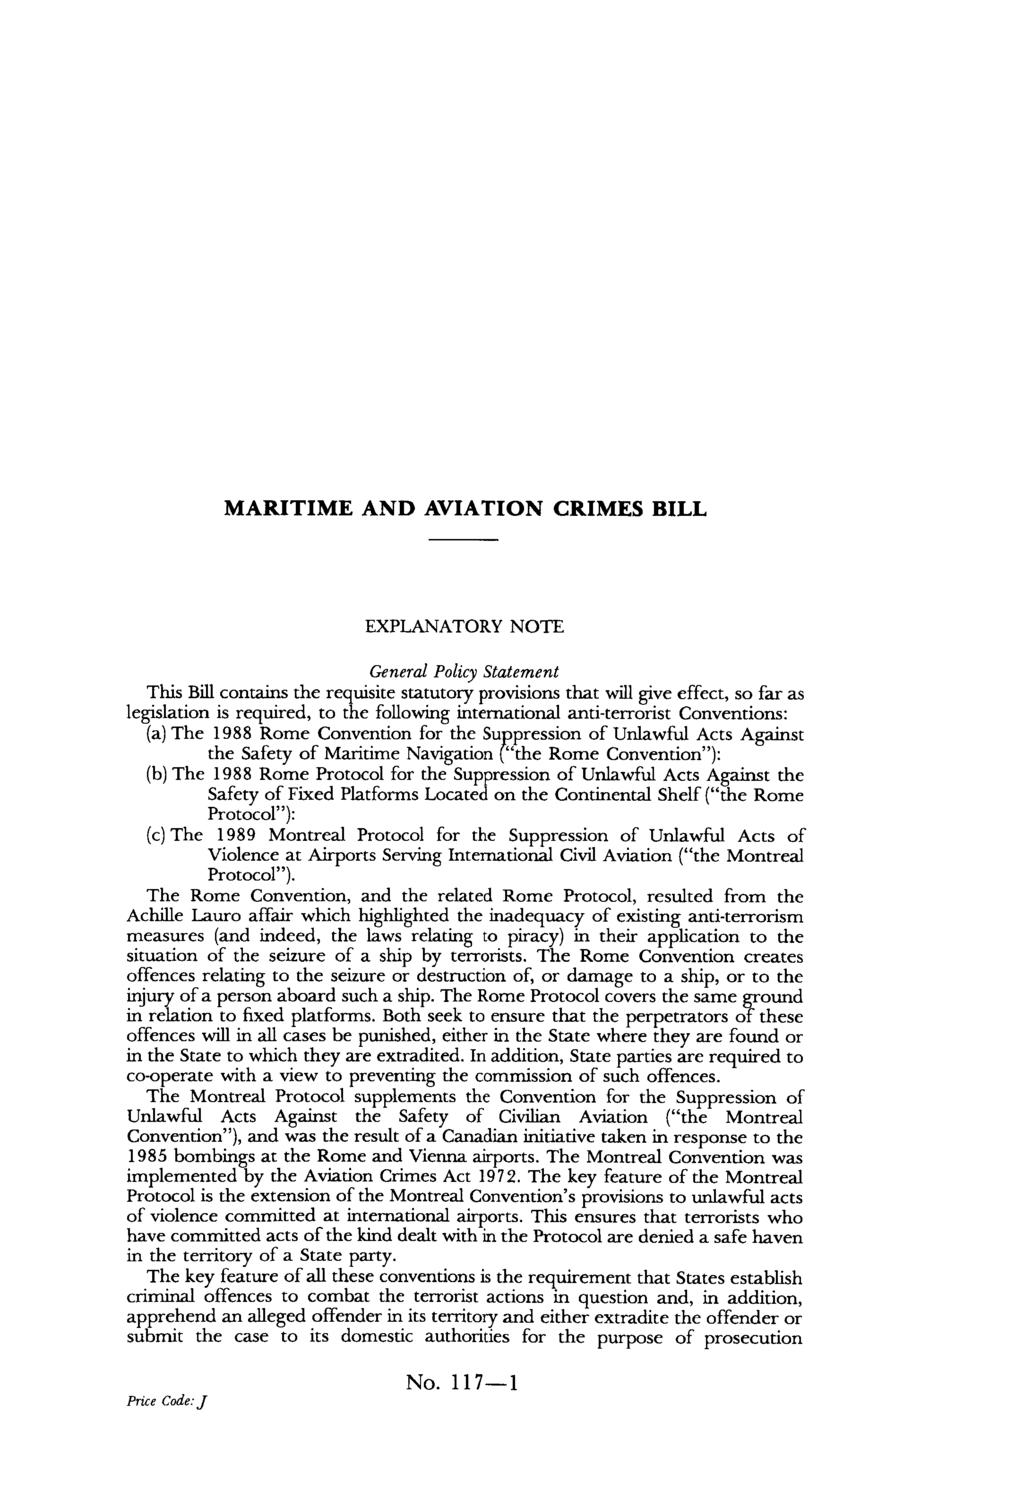 MARITIME AND AVIATION CRIMES BILL EXPLANATORY NOTE General Policy Statement This Bill contains the requisite statutory provisions that will give effect, so far as legislation is required, to the